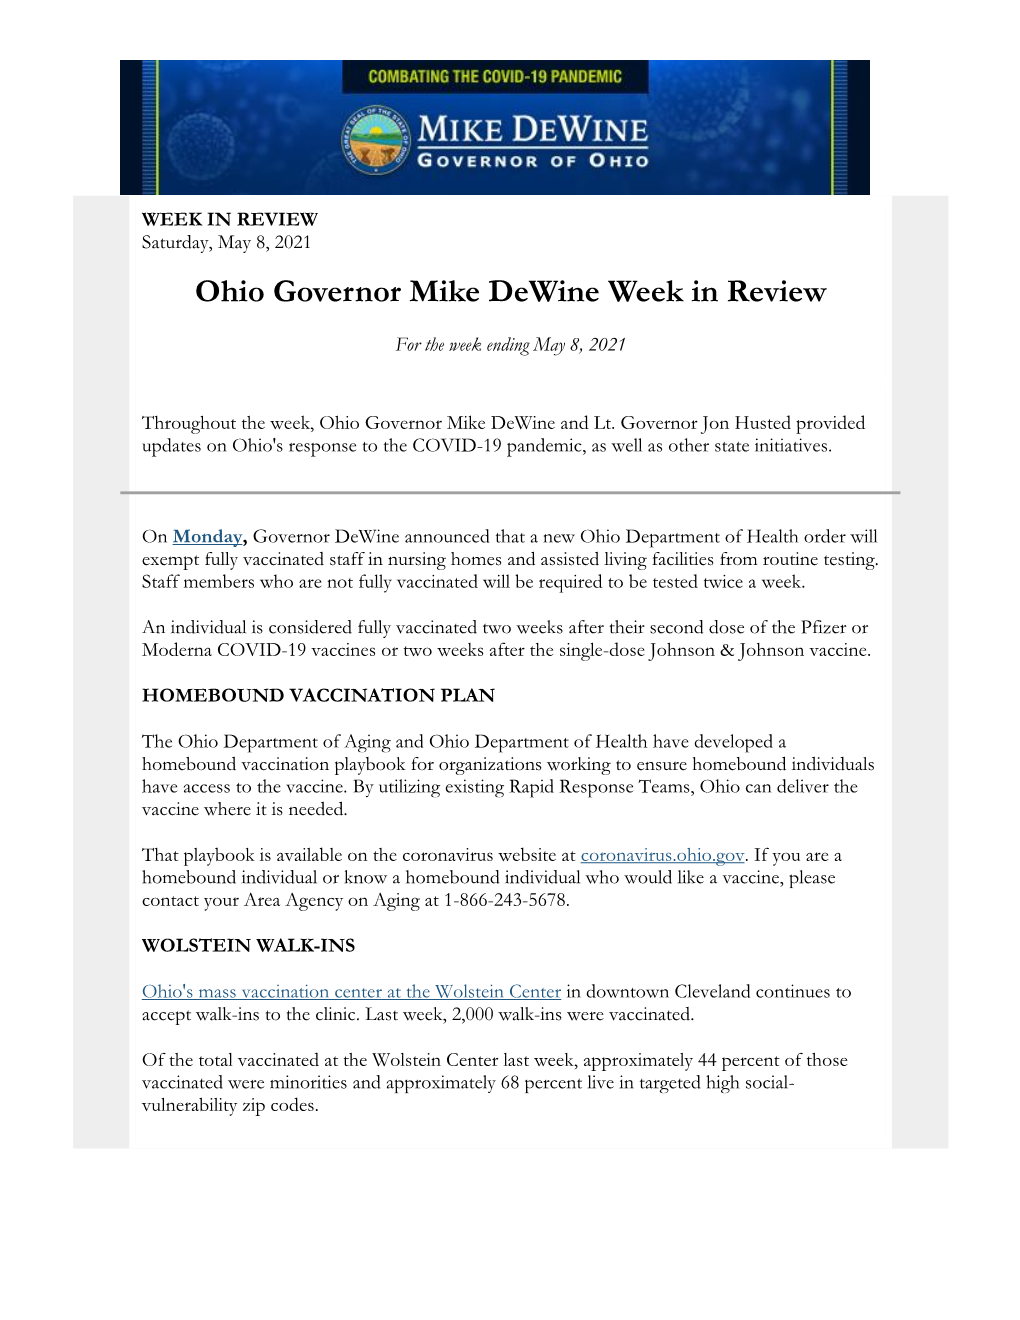 Ohio Governor Mike Dewine Week in Review